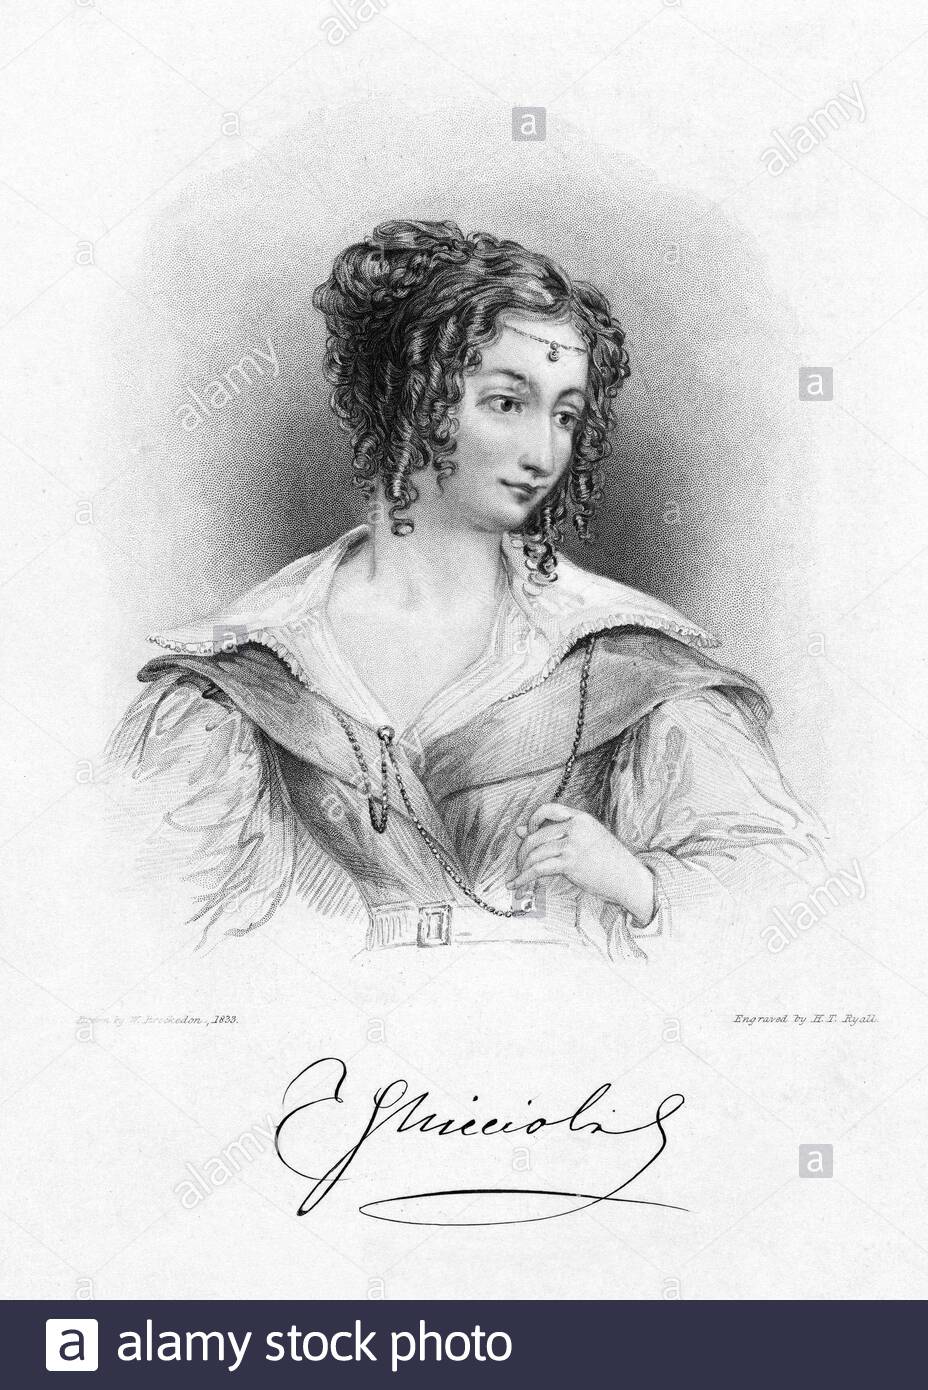 Teresa, Contessa Guiccioli, 1800 – 1873, was the married lover of Lord Byron while he was living in Ravenna and writing the first five cantos of Don Juan. She wrote the biographical account Lord Byron's Life in Italy. Vintage illustration from 1833. Stock Photo